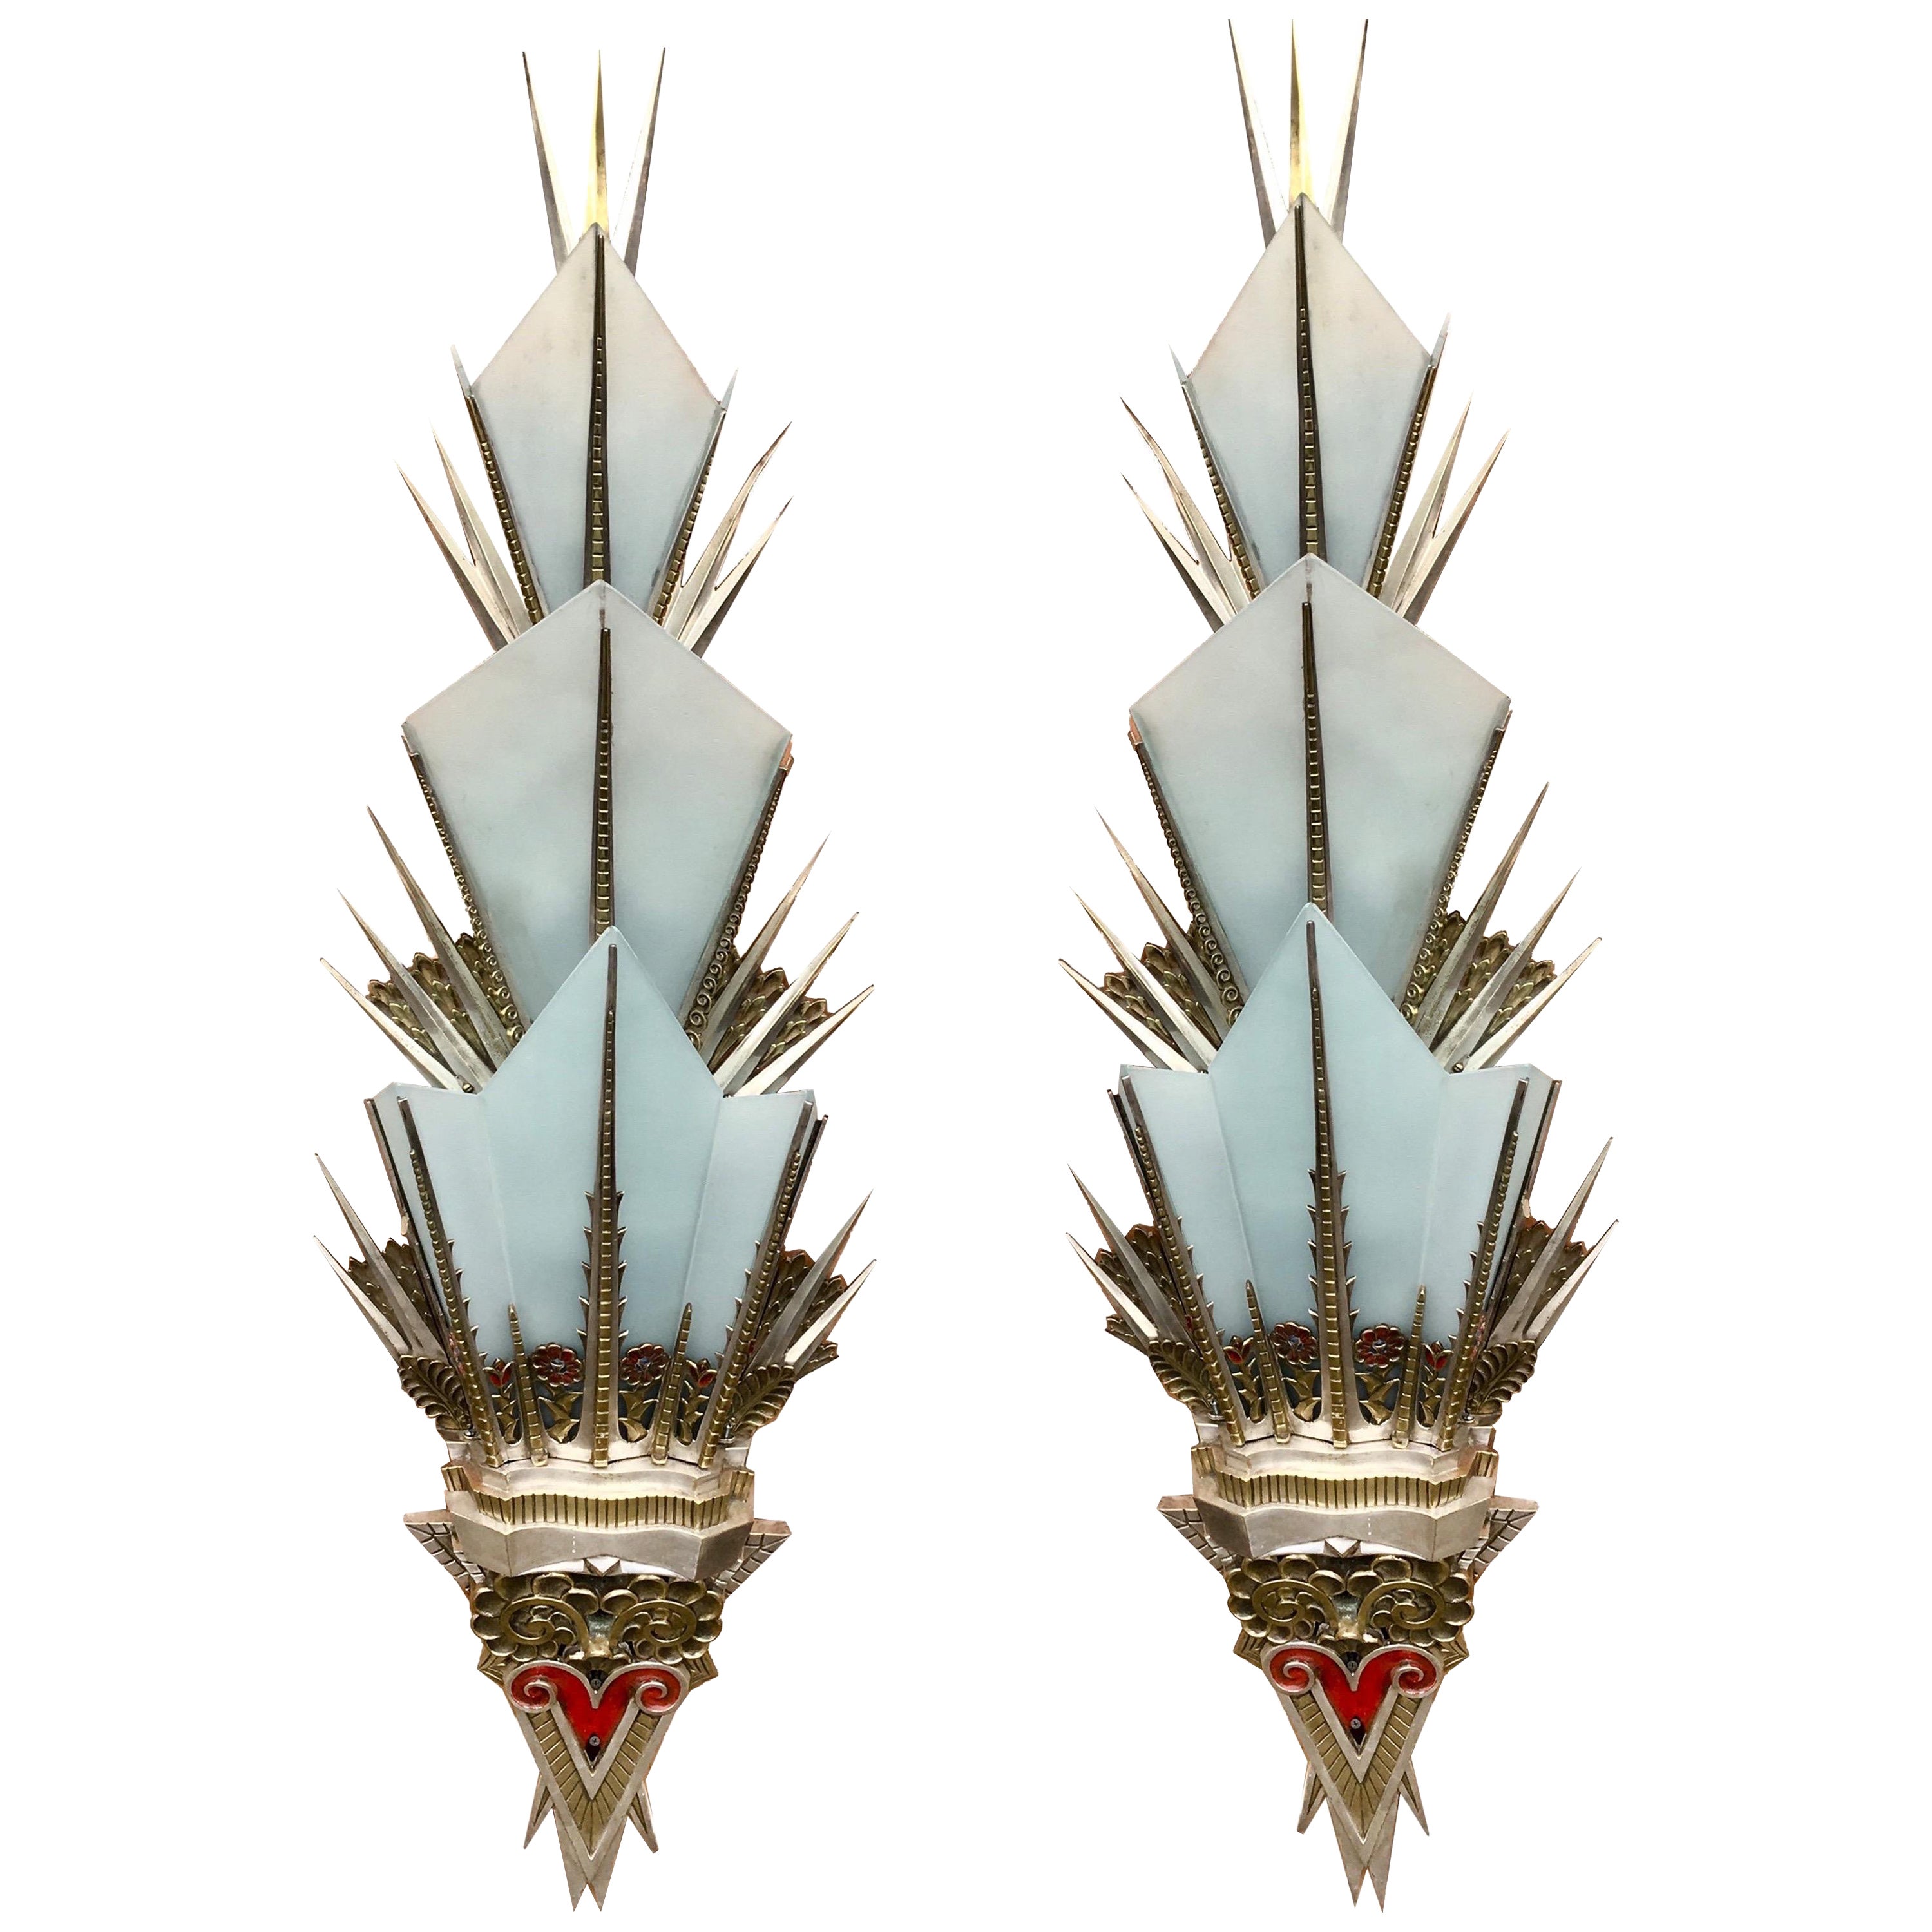 Rare “CALDWELL”  monumental, historical deco sconces from the Fisher buildings For Sale